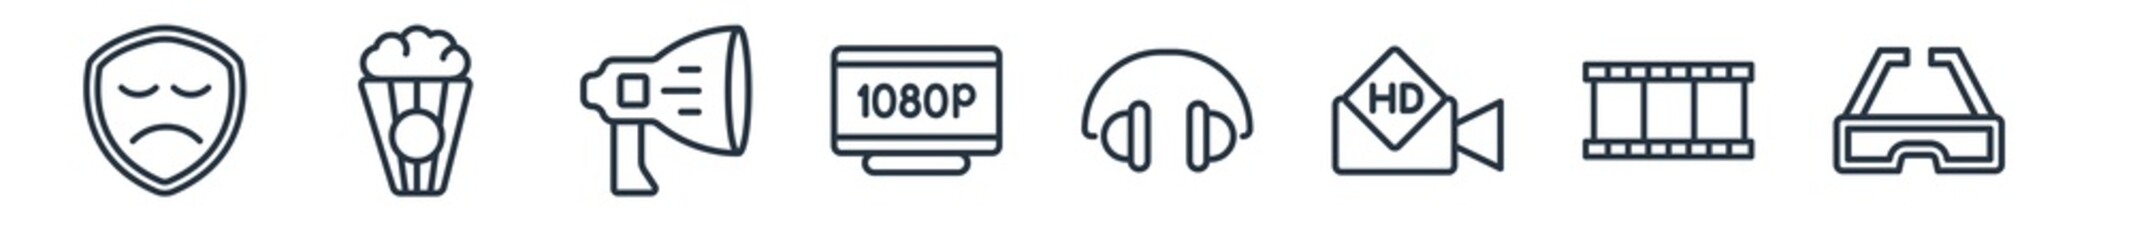 linear set of cinema outline icons. line vector icons such as sad mask, popcorn bag, loud speaker facing right, 1080p hd tv, headphone, 3d glass vector illustration.